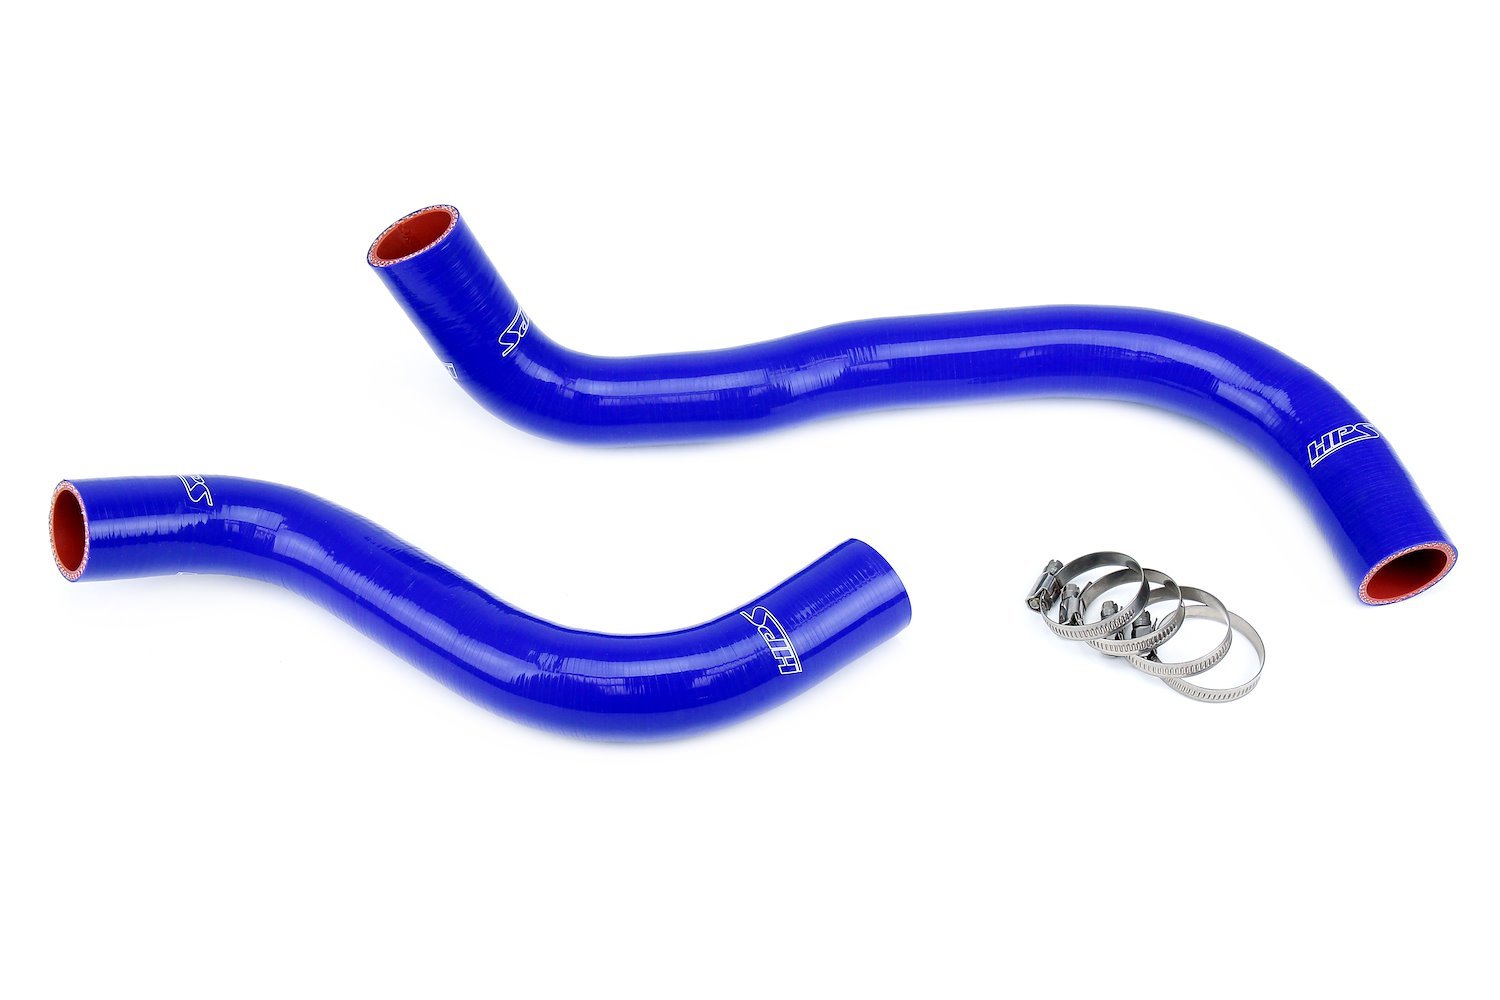 57-1828-BLUE Radiator Hose Kit, 3-Ply Reinforced Silicone, Replaces Rubber Radiator Coolant Hoses